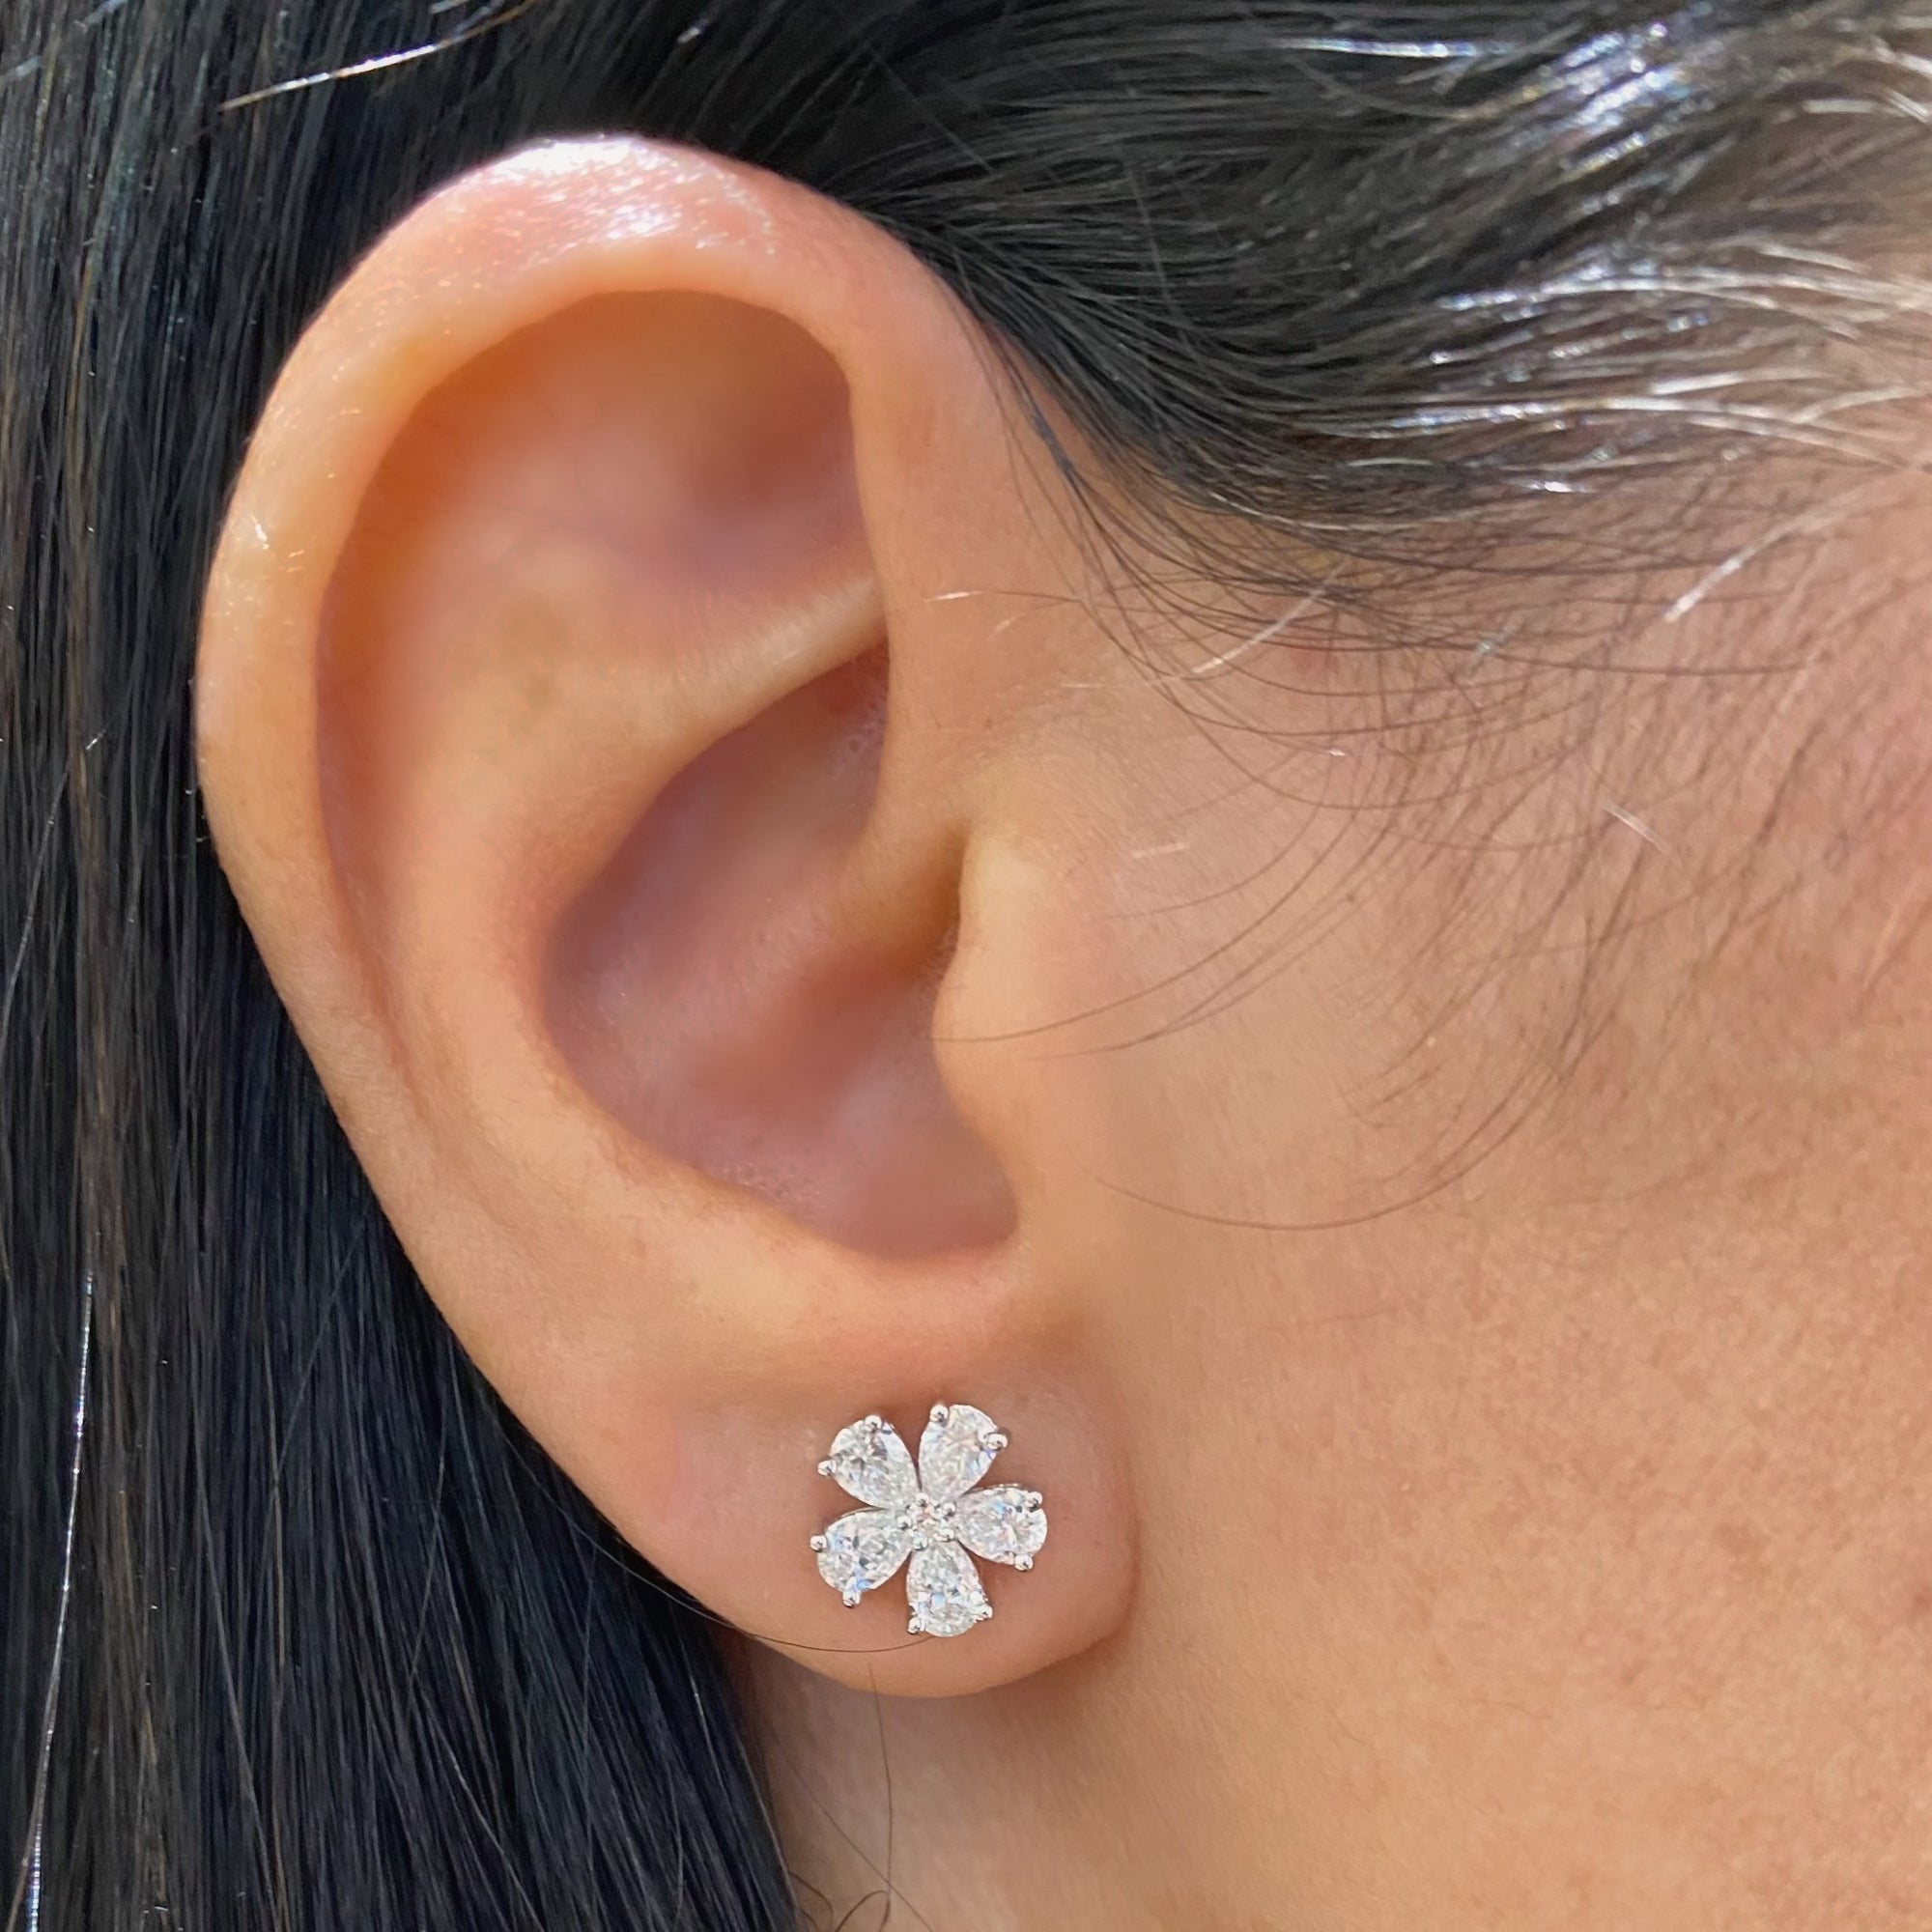 Diamond Flower Stud Earrings - 18K white gold weighing 2.09 grams  - 10 pear-shaped diamonds weighing 1.36 carats  - 2 round diamonds weighing 0.04 carats